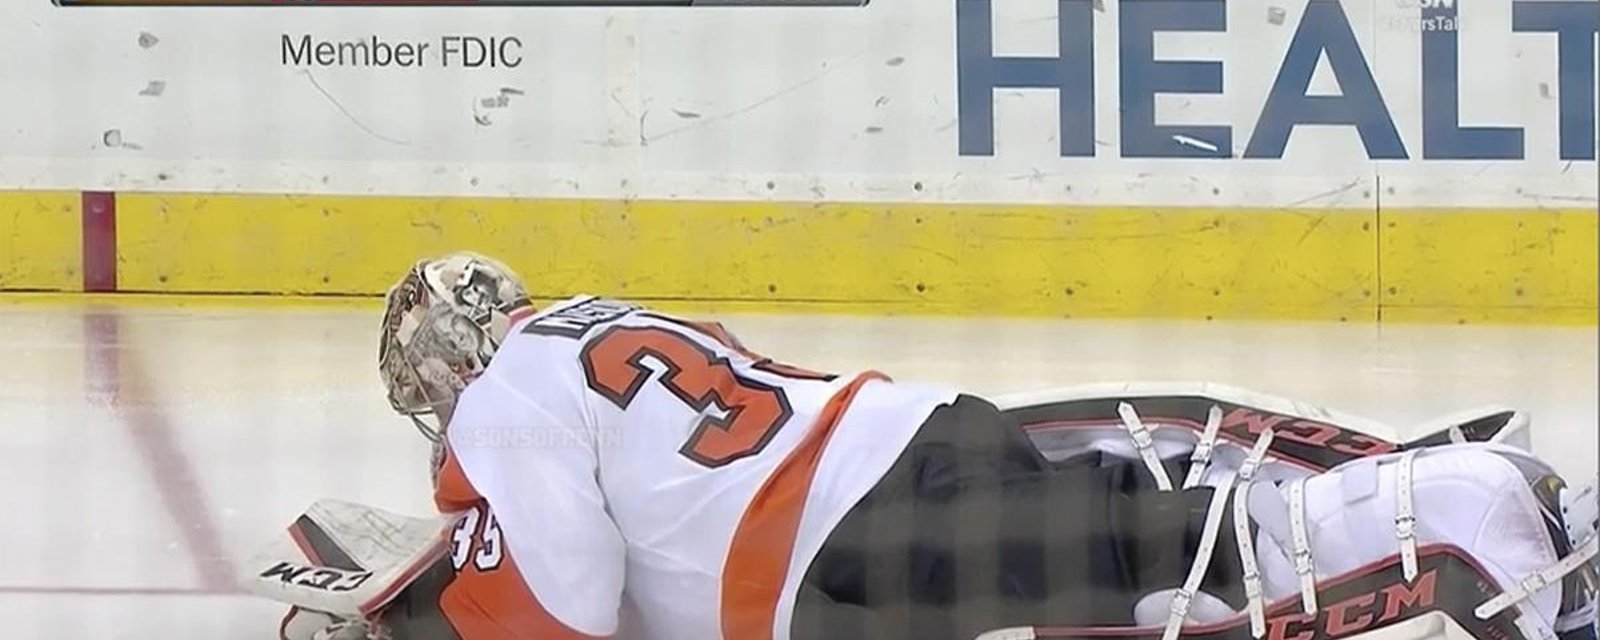 Flyers lose key player tonight in crushing defeat. 